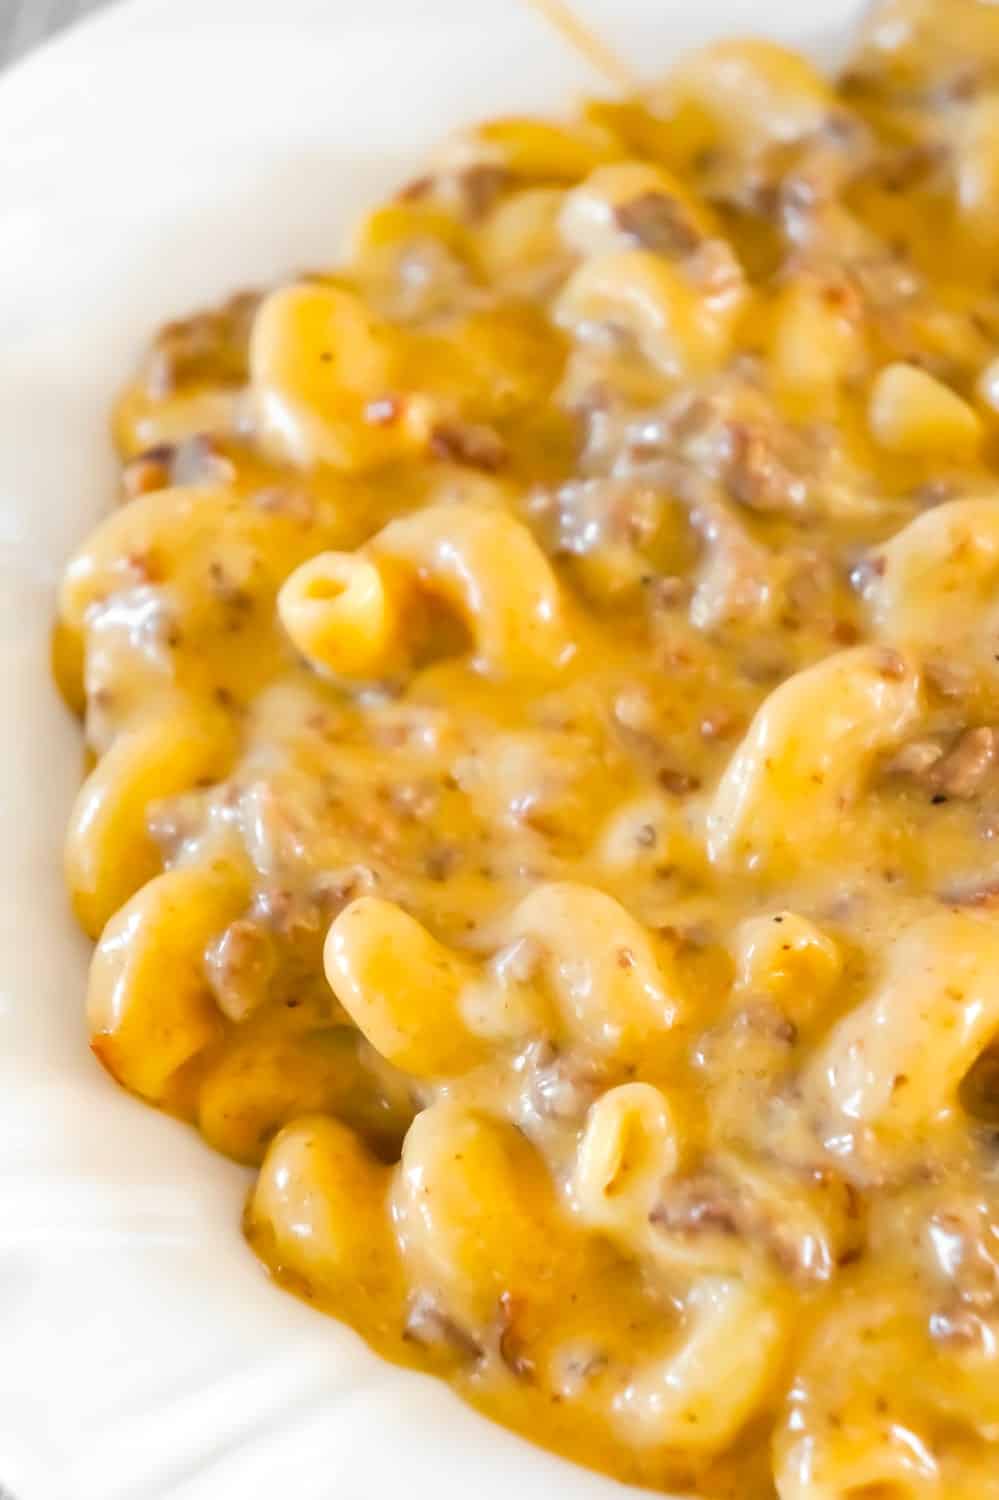 Instant Pot Bacon Cheeseburger Pasta is an easy ground beef dinner recipe packed with flavour. This cheesy pasta is super creamy and loaded with ground beef and real bacon bits.